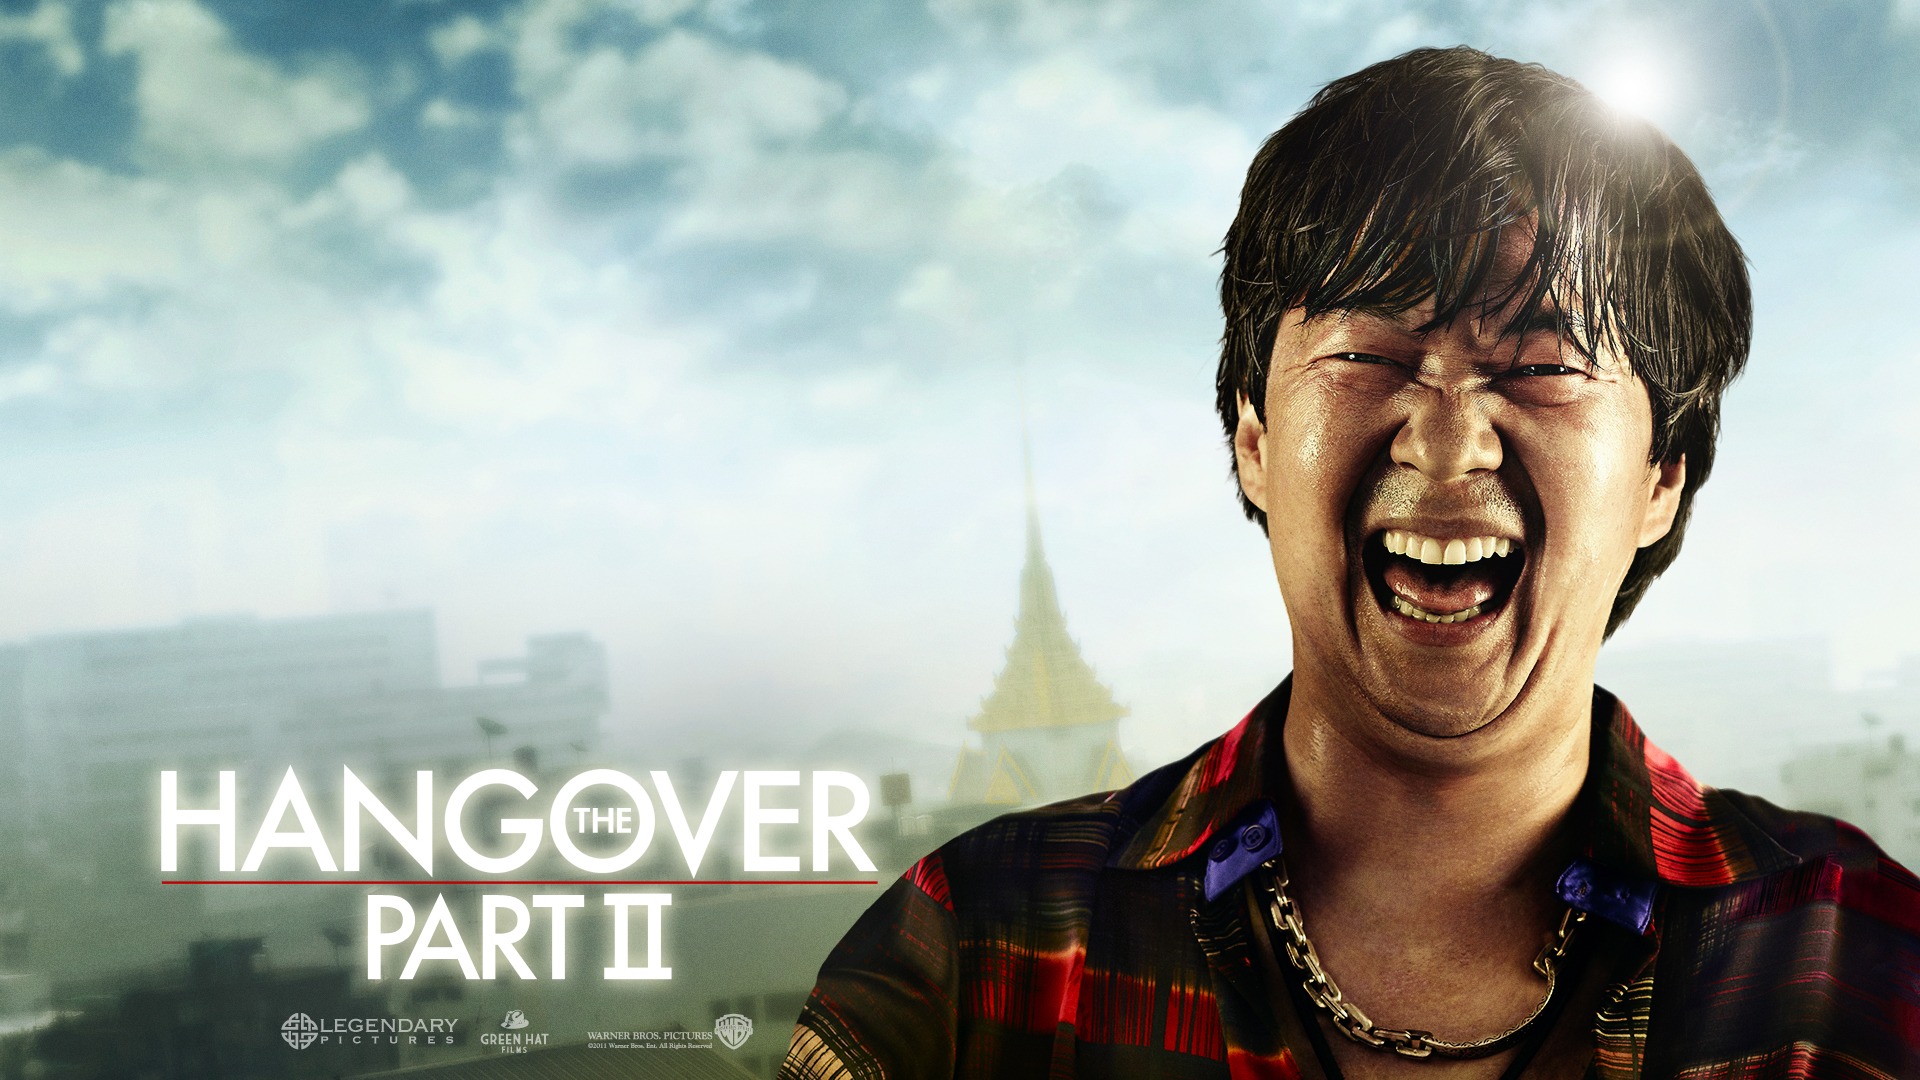 The Hangover Part II wallpapers #6 - 1920x1080